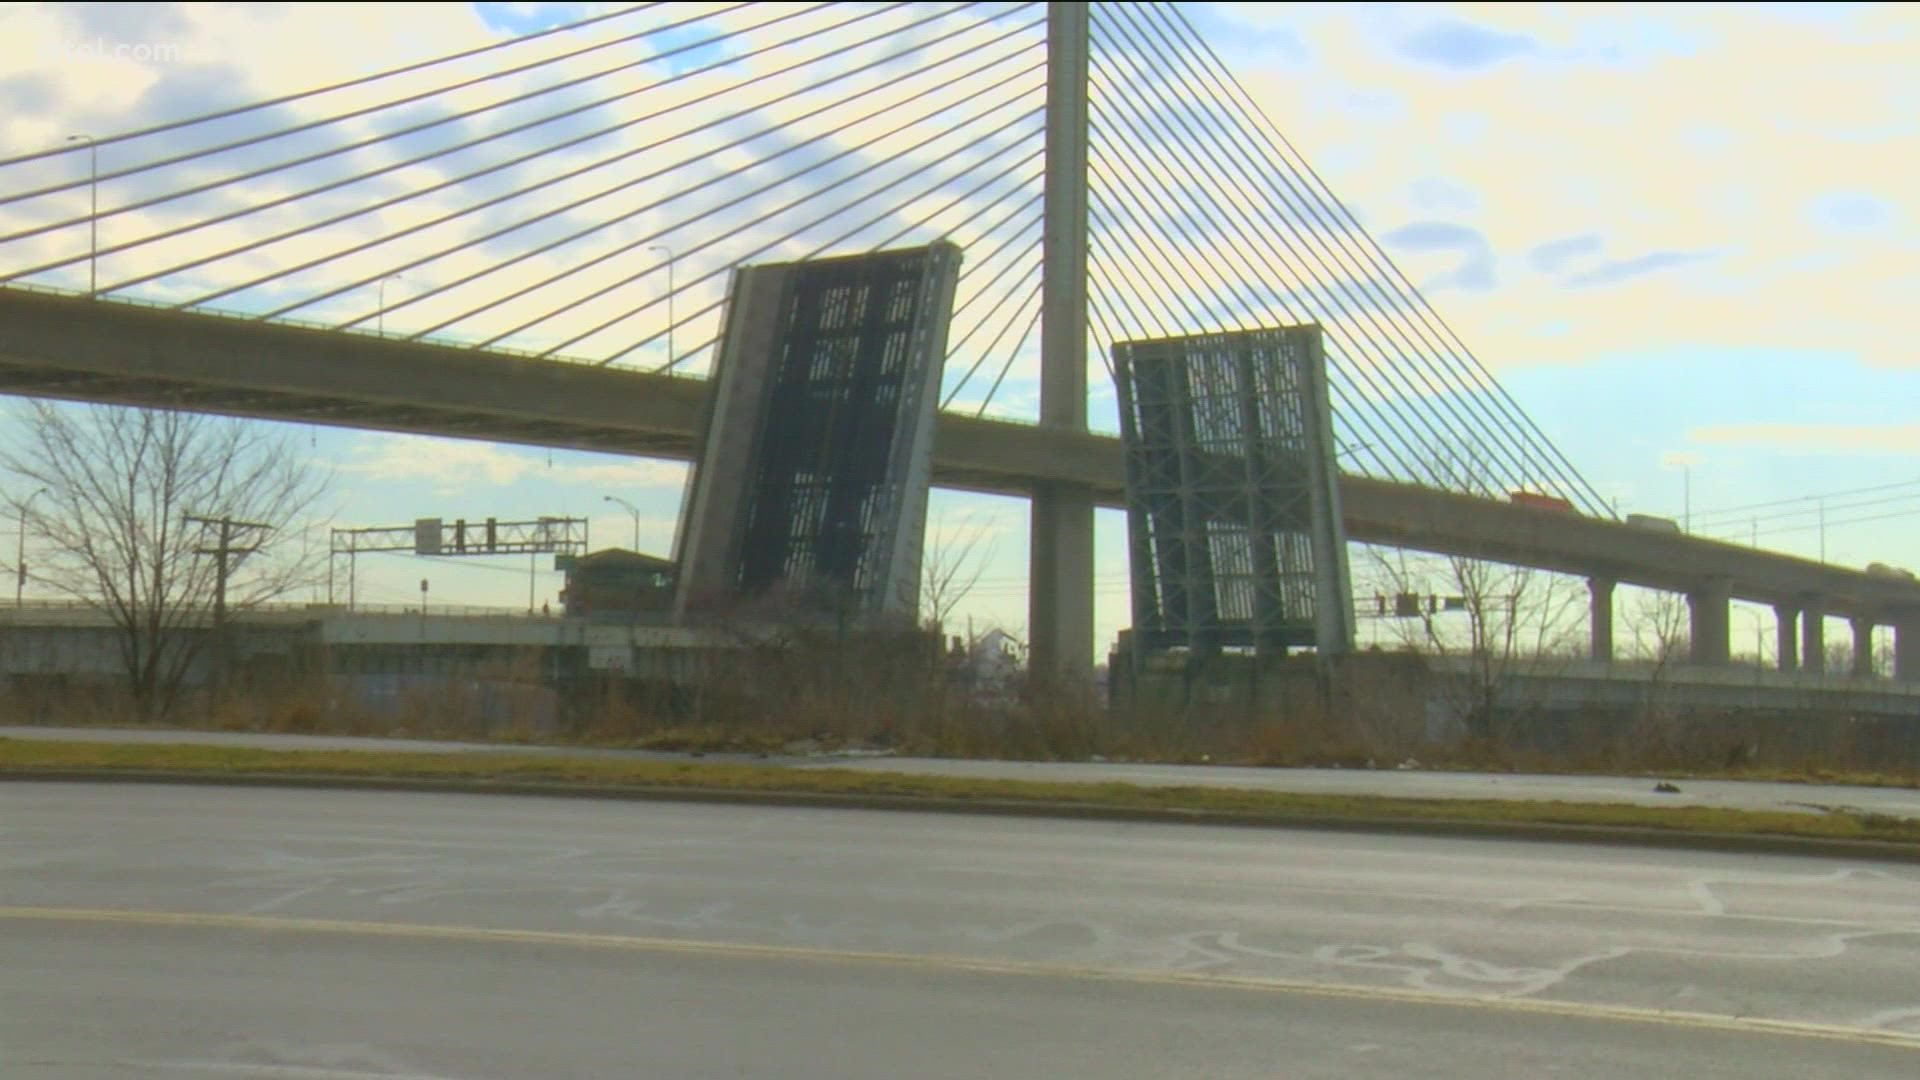 The drawbridge, which carries State Route 65 over the Maumee River, has been stuck open since March 21 after an electrical component became overloaded.